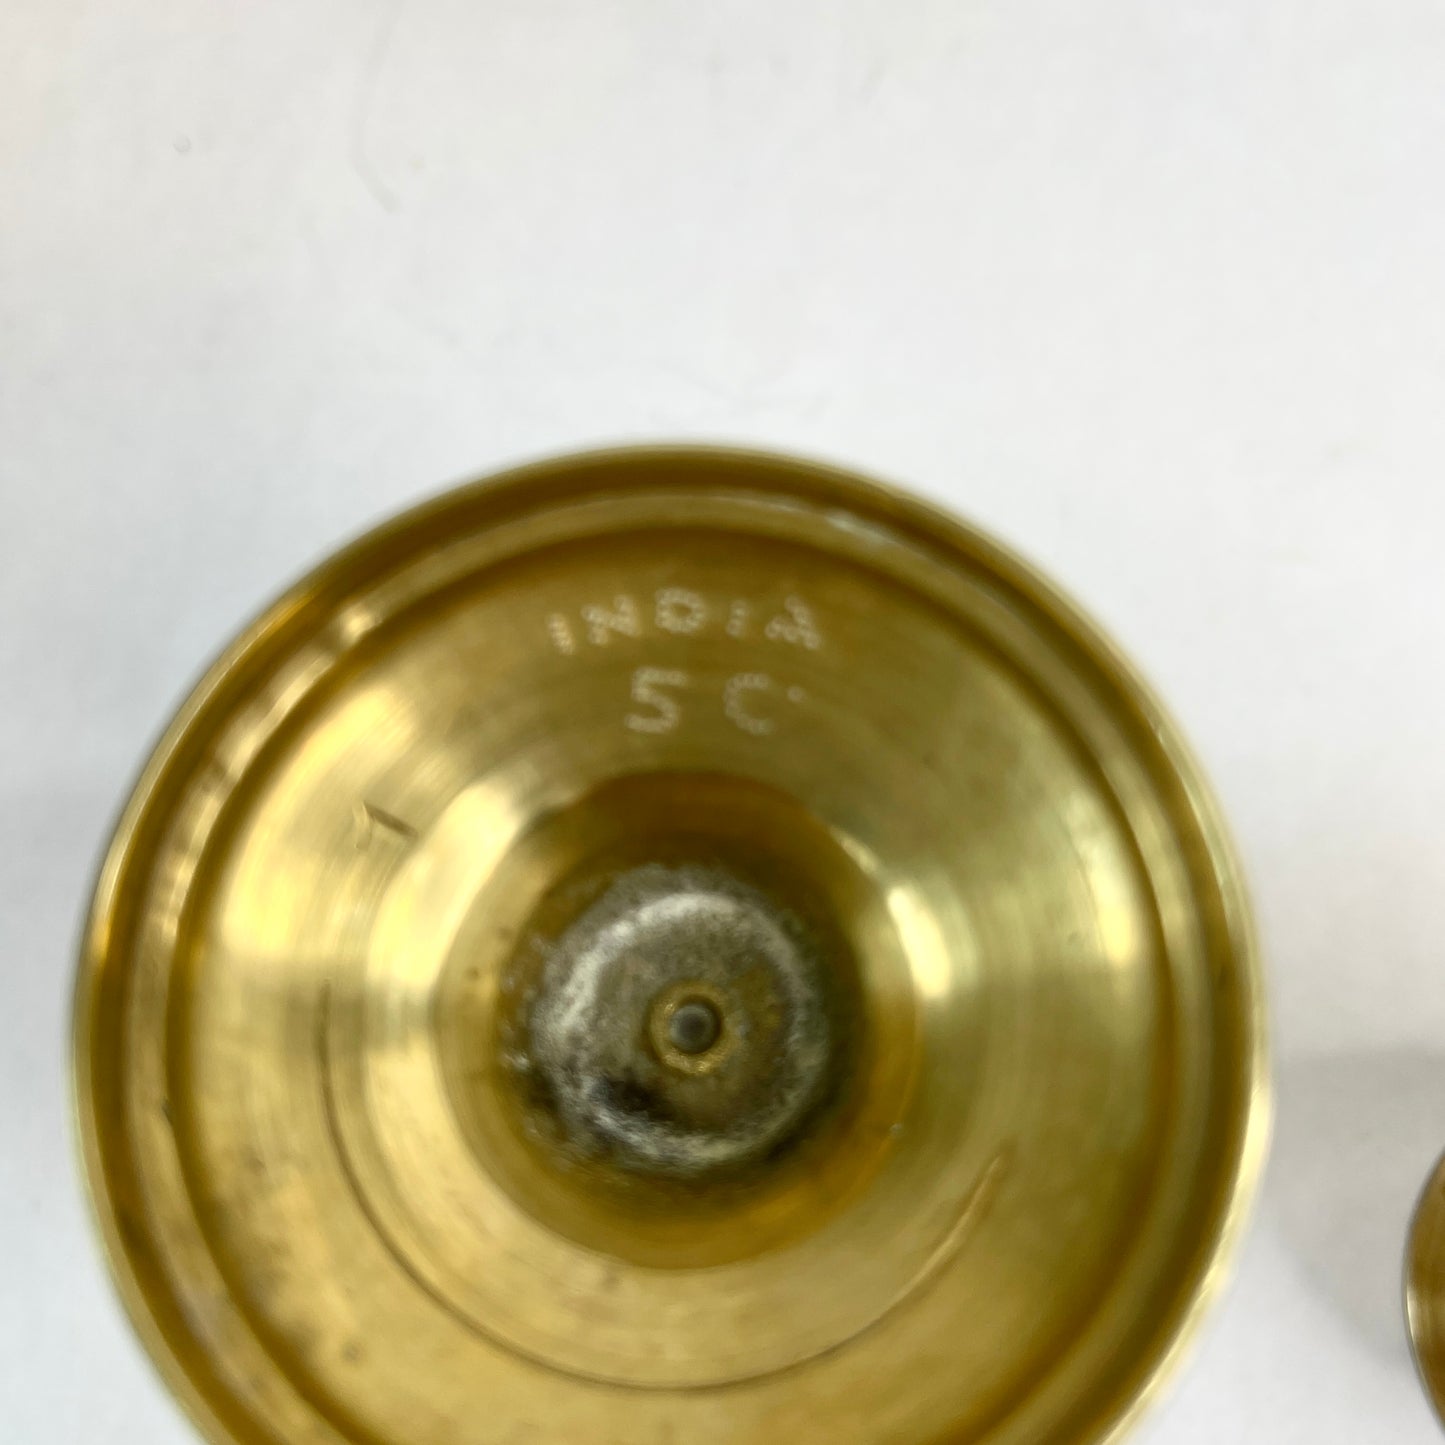 Vintage Brass Vases - Price is for the Pair